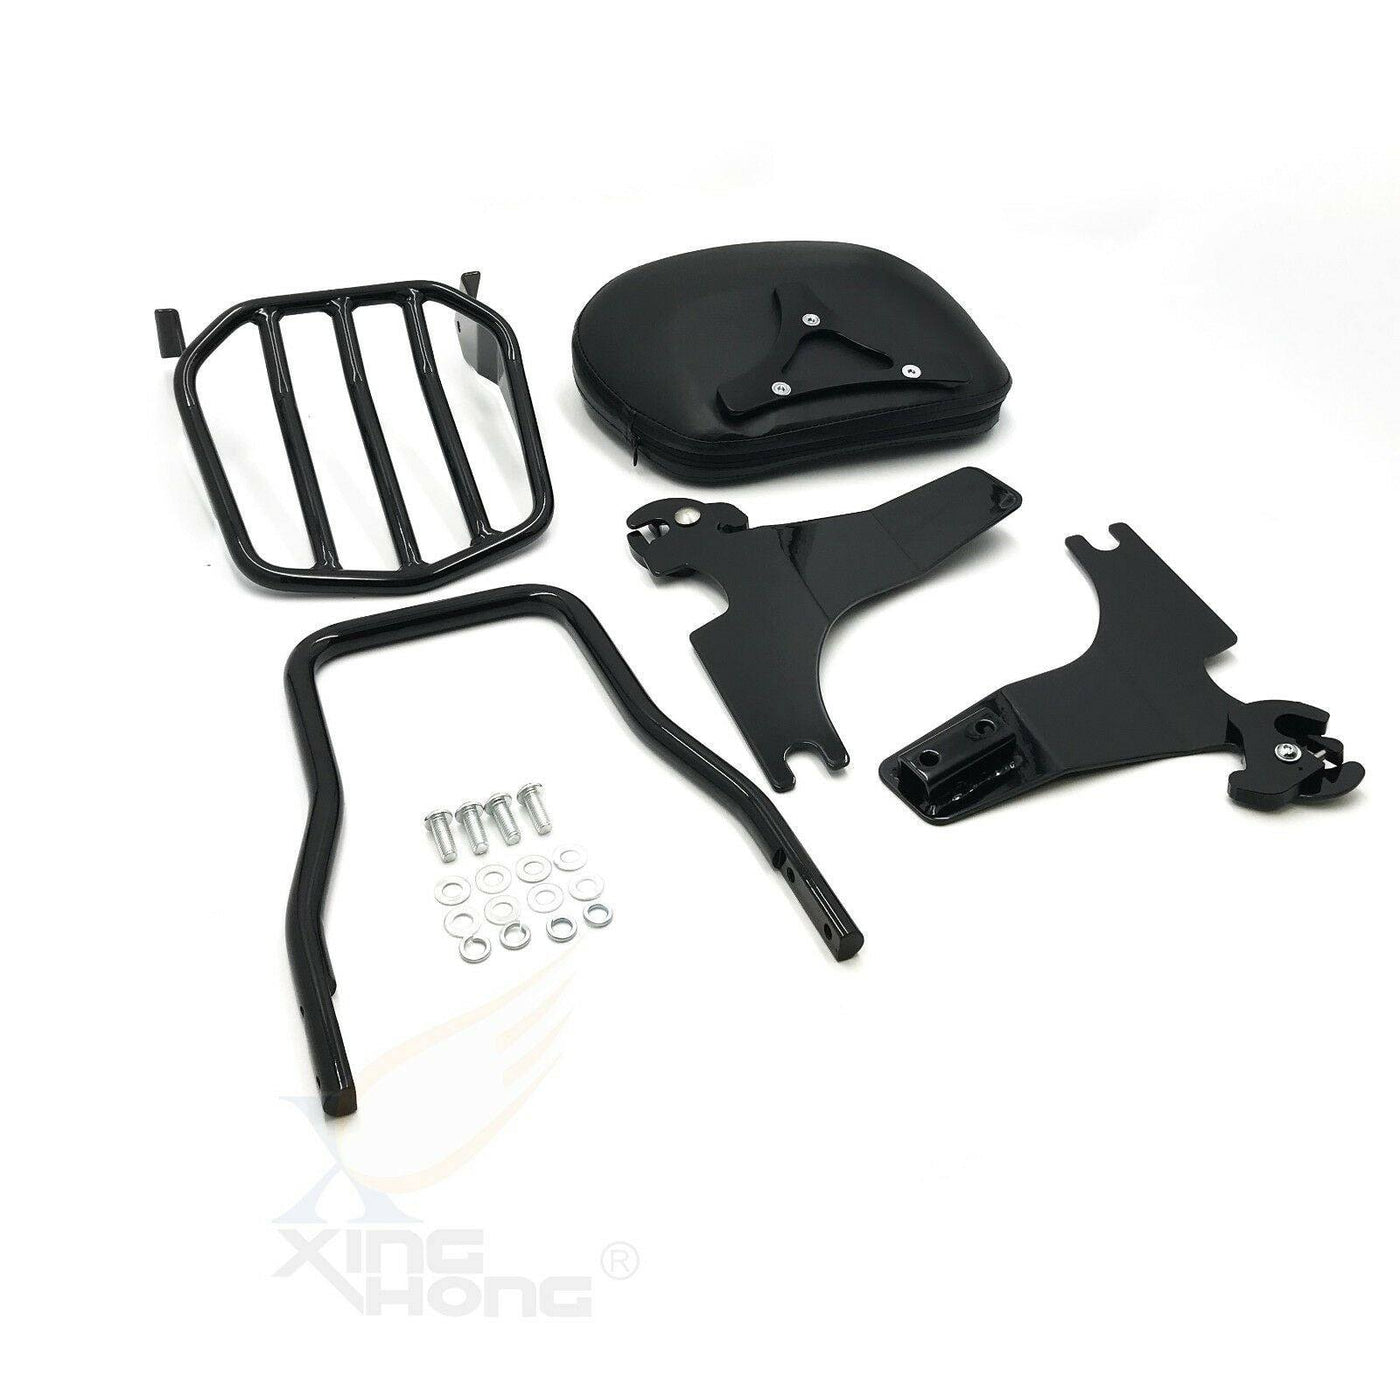 Sissy Bar Backrest Luggage Rack For Harley Sportster XL883 XL1200 04-17 - Moto Life Products